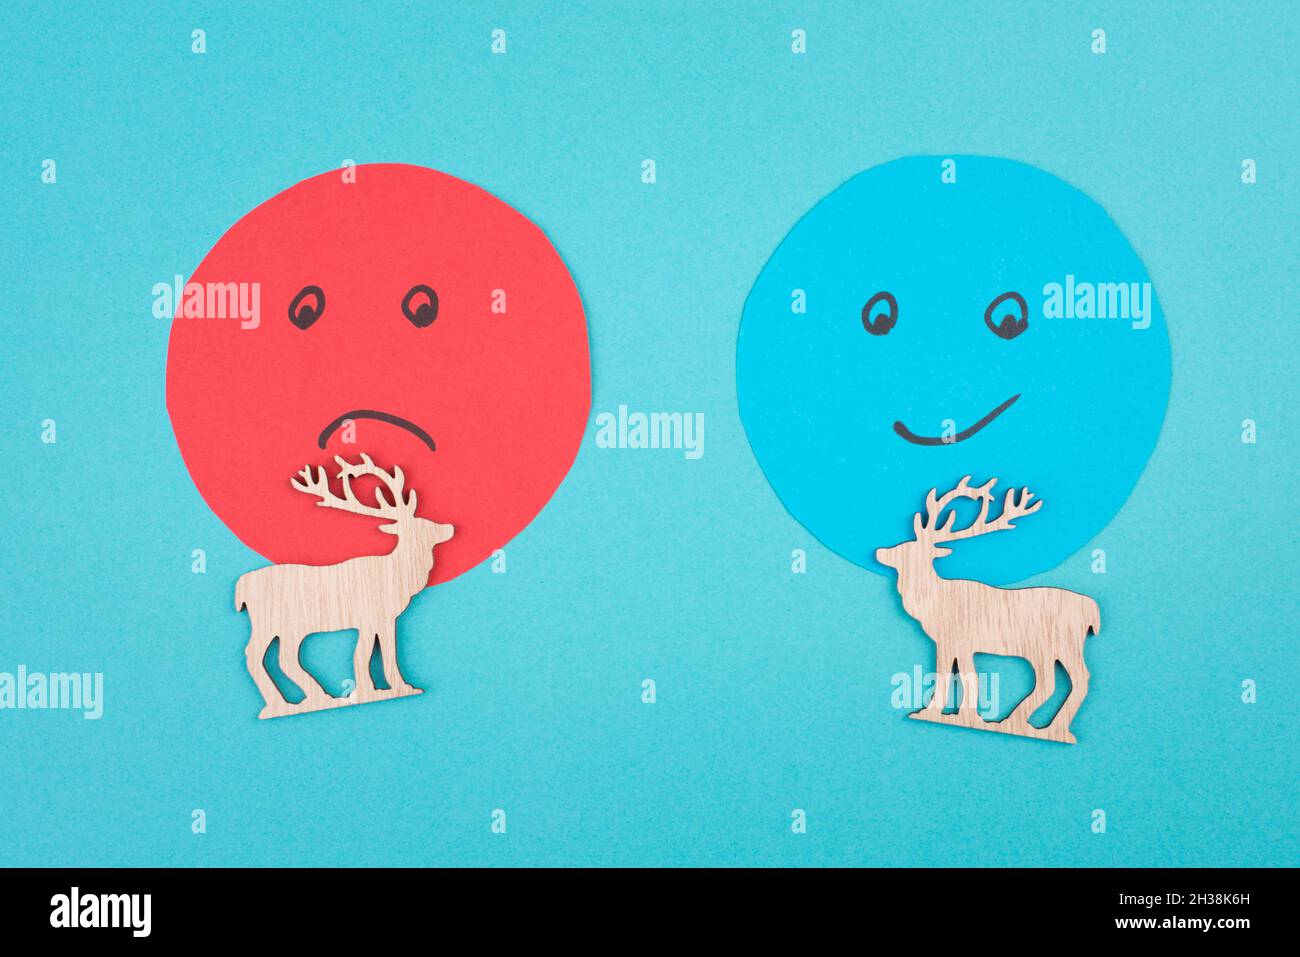 An angry and a smiling face behind two reindeers, customer rating, christmas season, concept, blue background Stock Photo